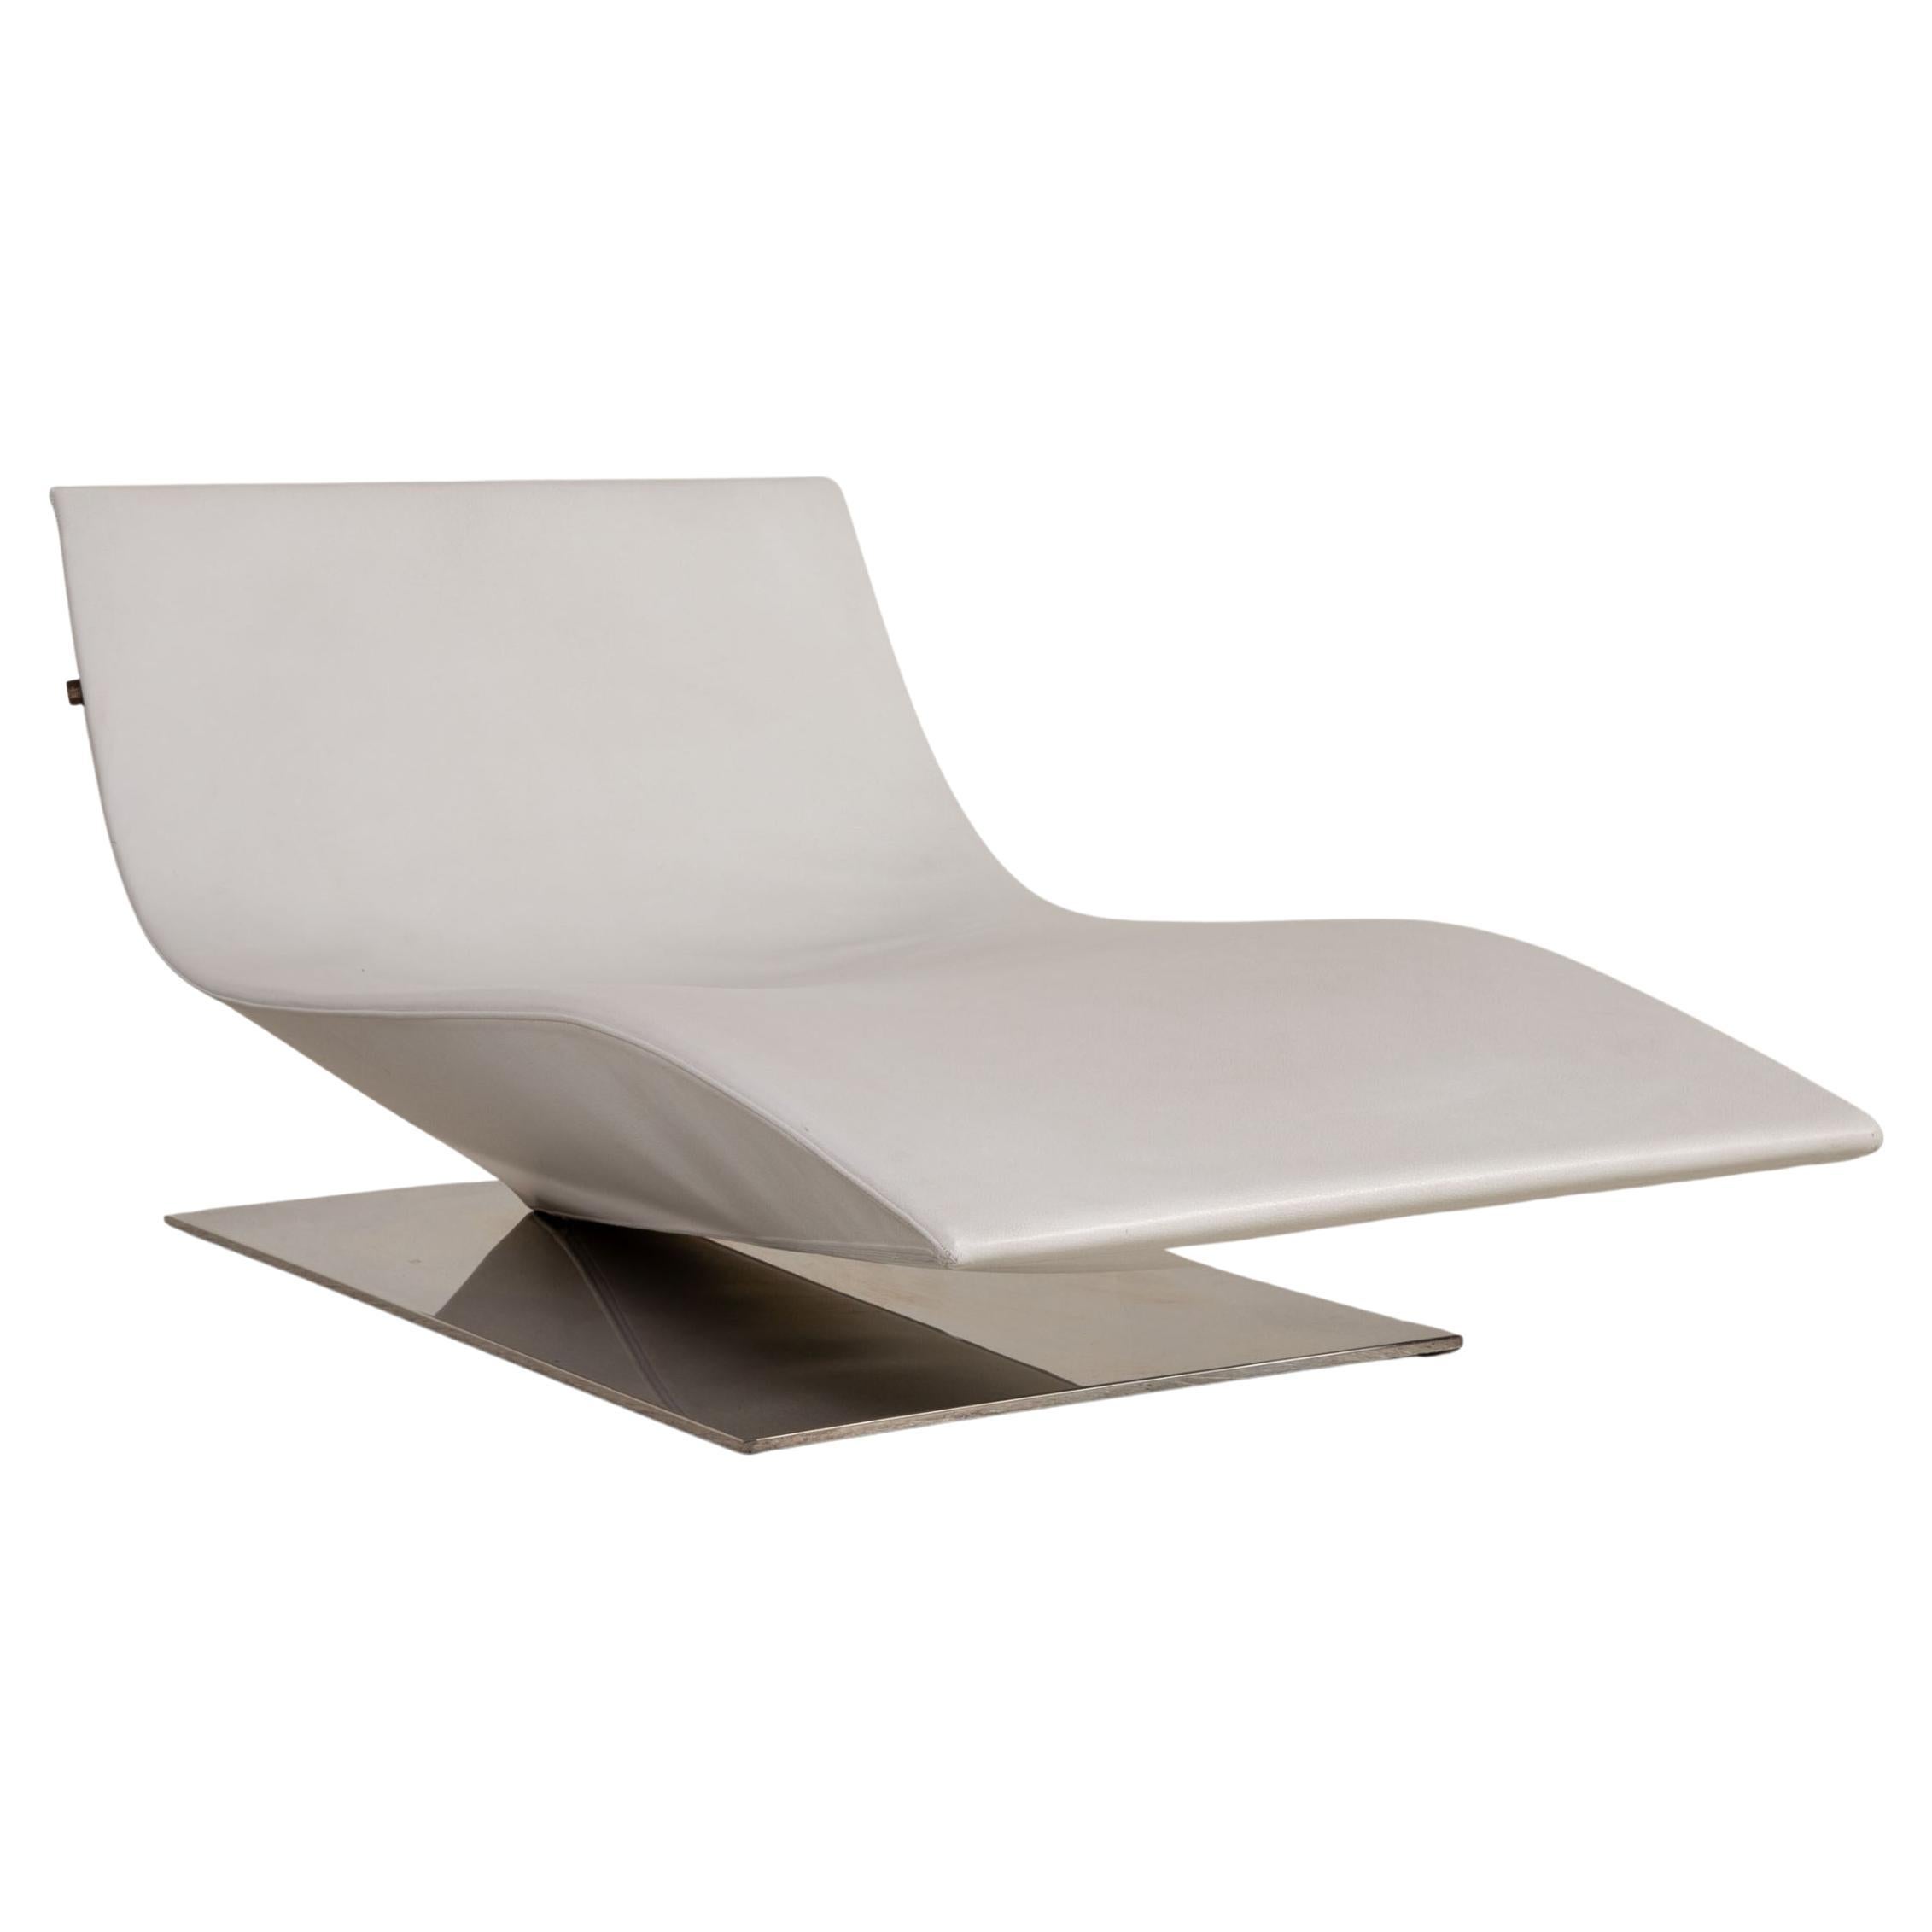 Mdf Italia Lofty Leather Lounger White For Sale